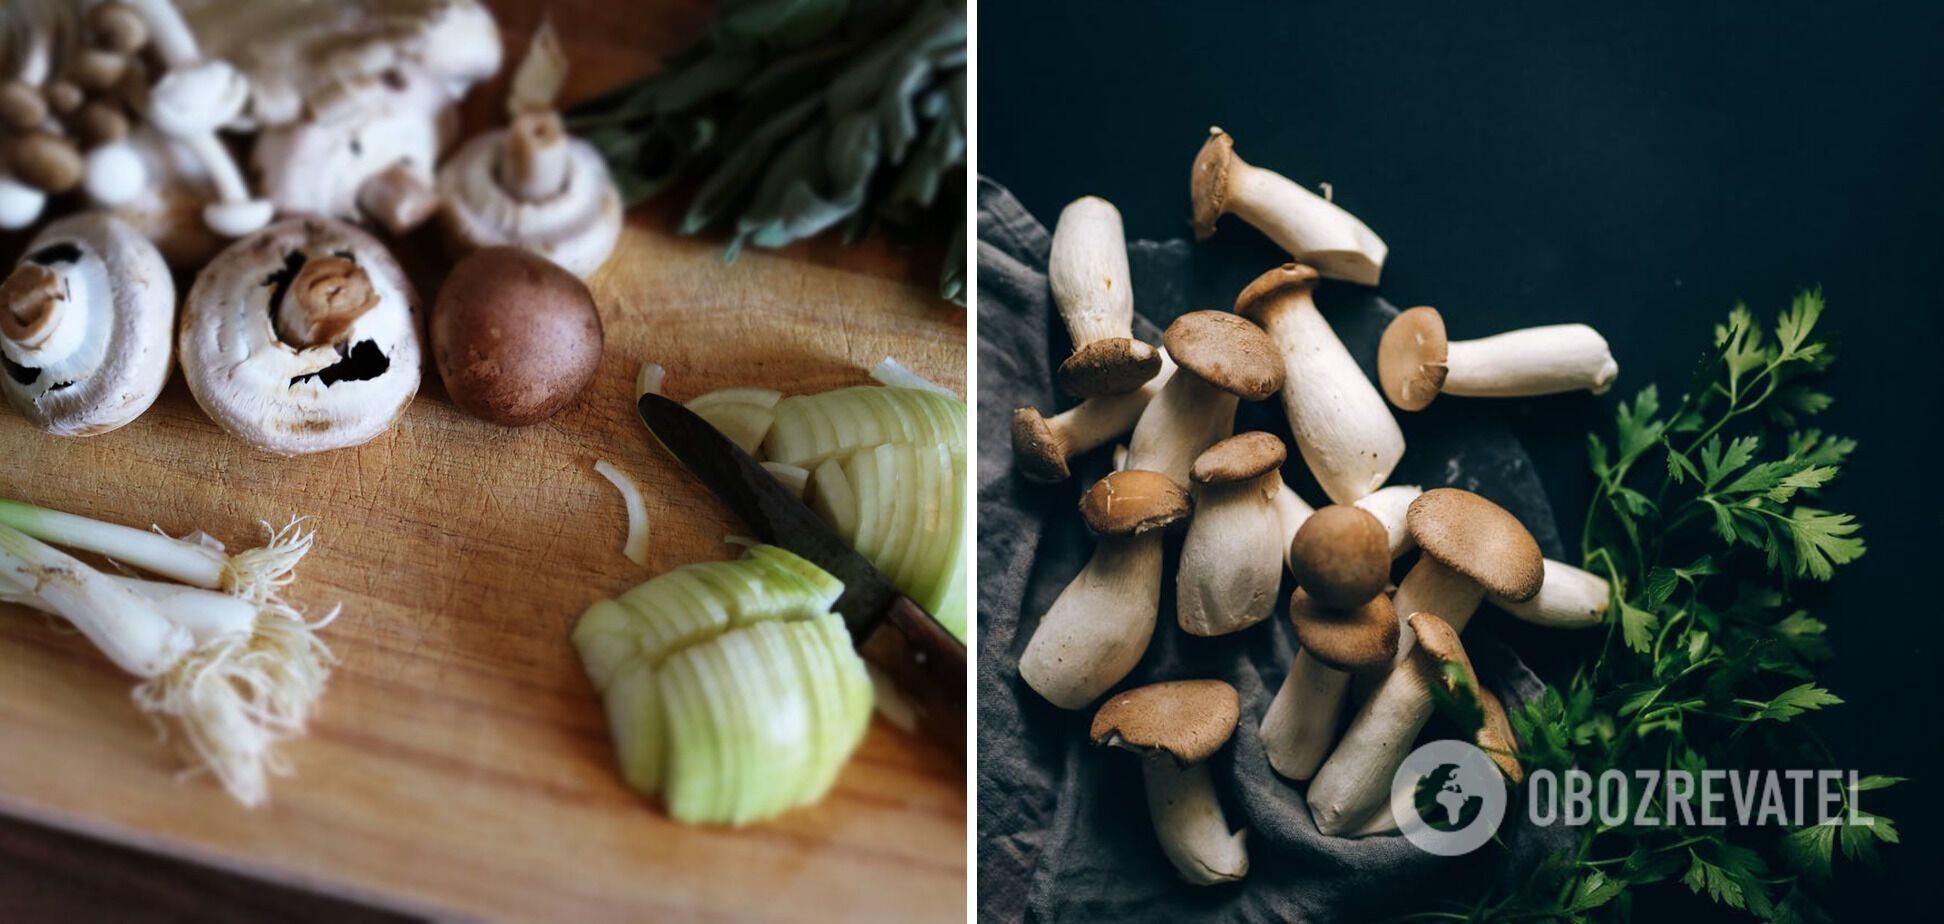 How to make a delicious soup from mushrooms